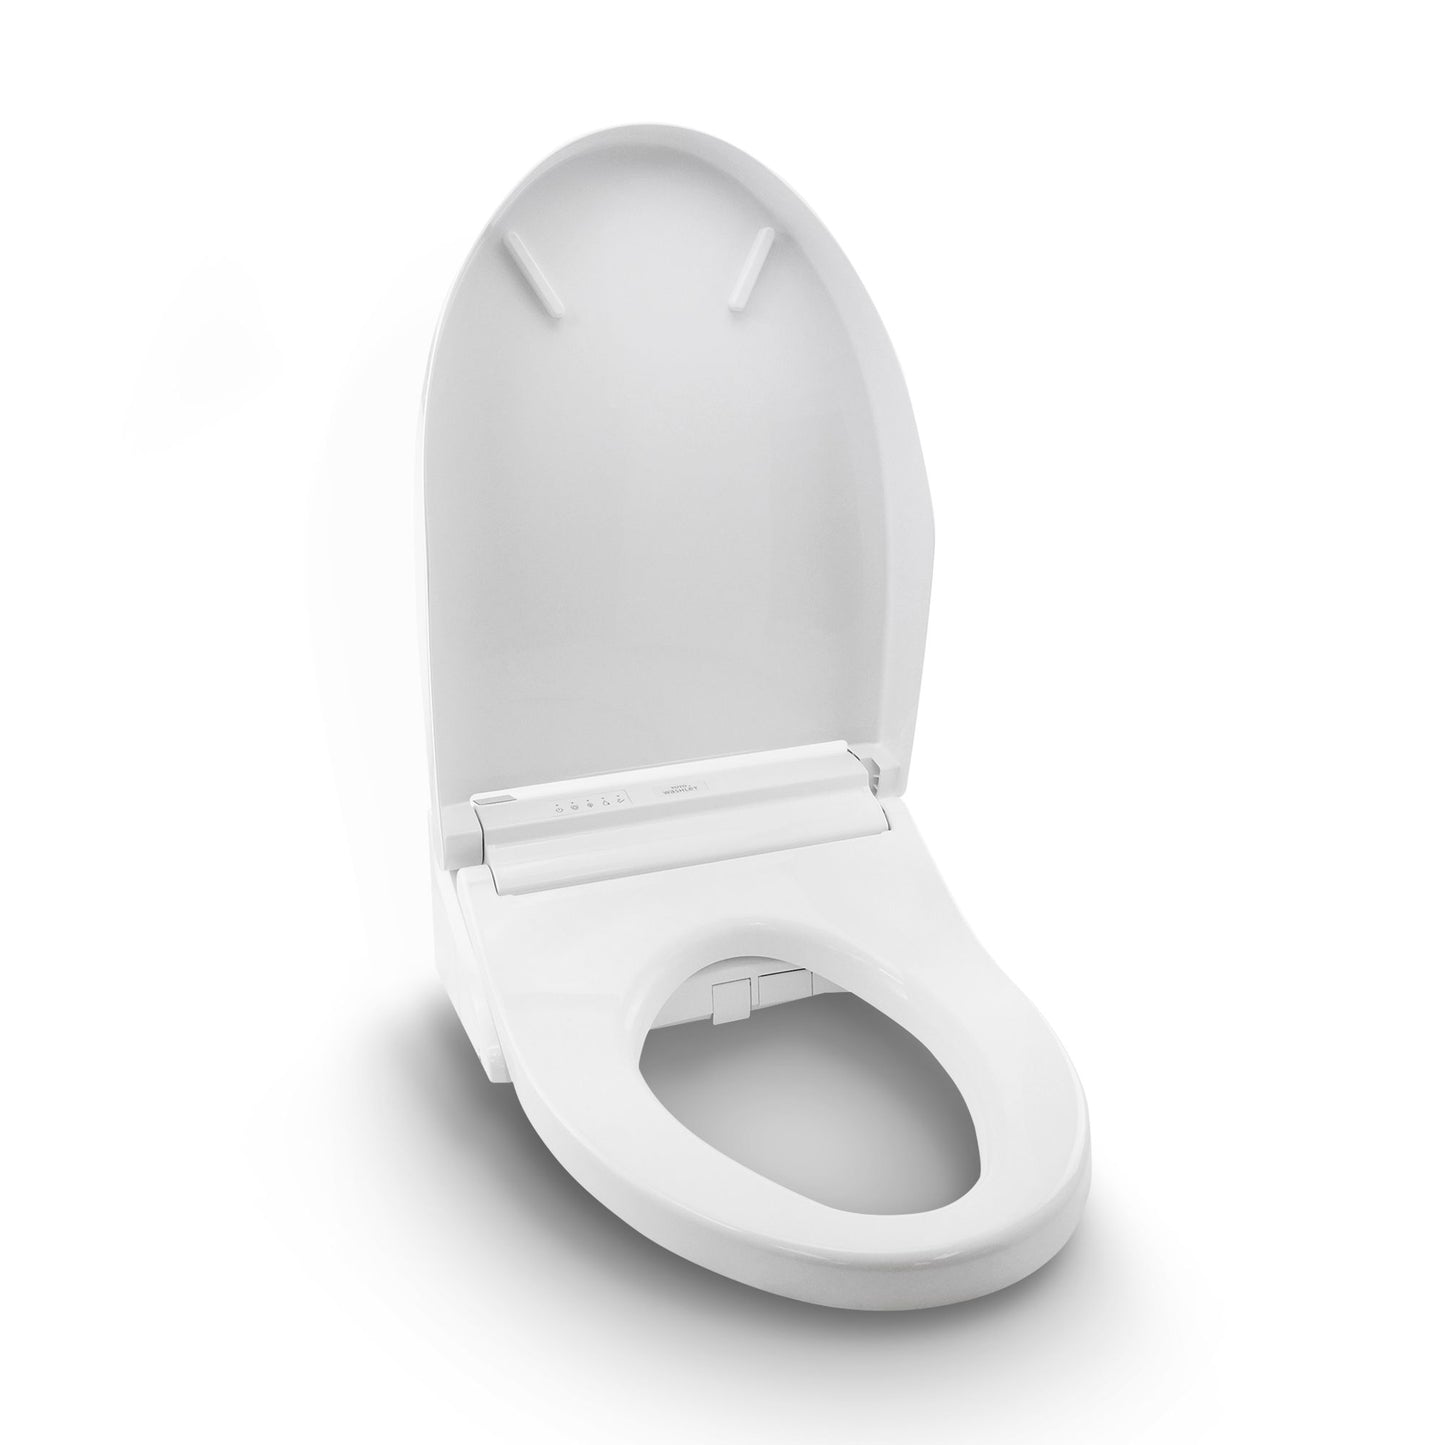 Washlet C5 Smart Bidet Seat by Toto, for Elongated Bowls, Adjustable Water/Air Temperature, Remote Control, Heated Seat, Deodorizer,  SW3084#01